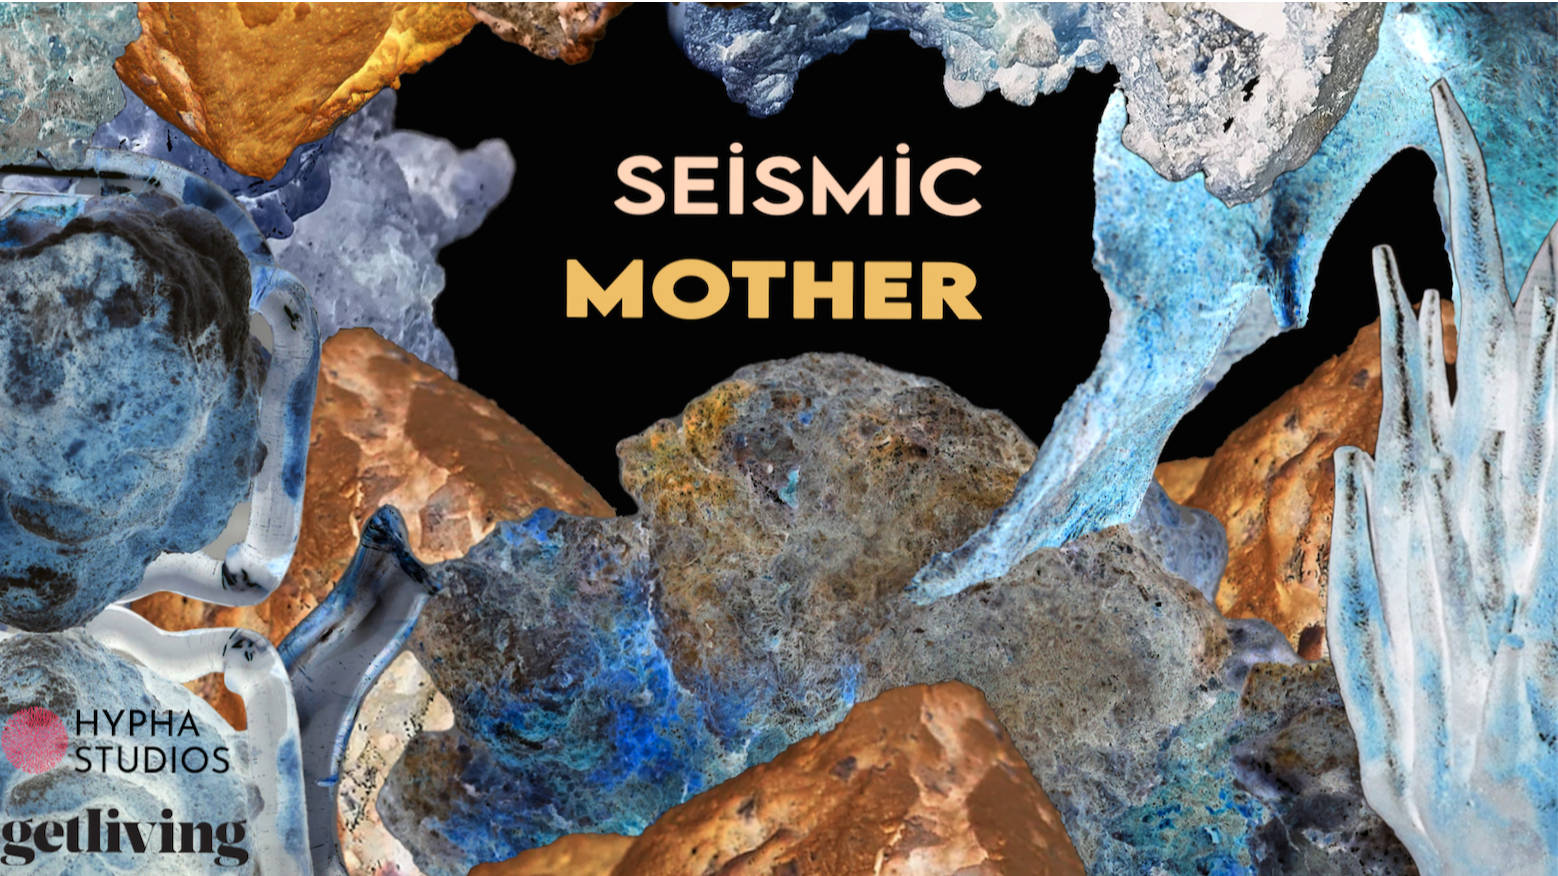 Seismic Mother by holly birtles & charley blackburn